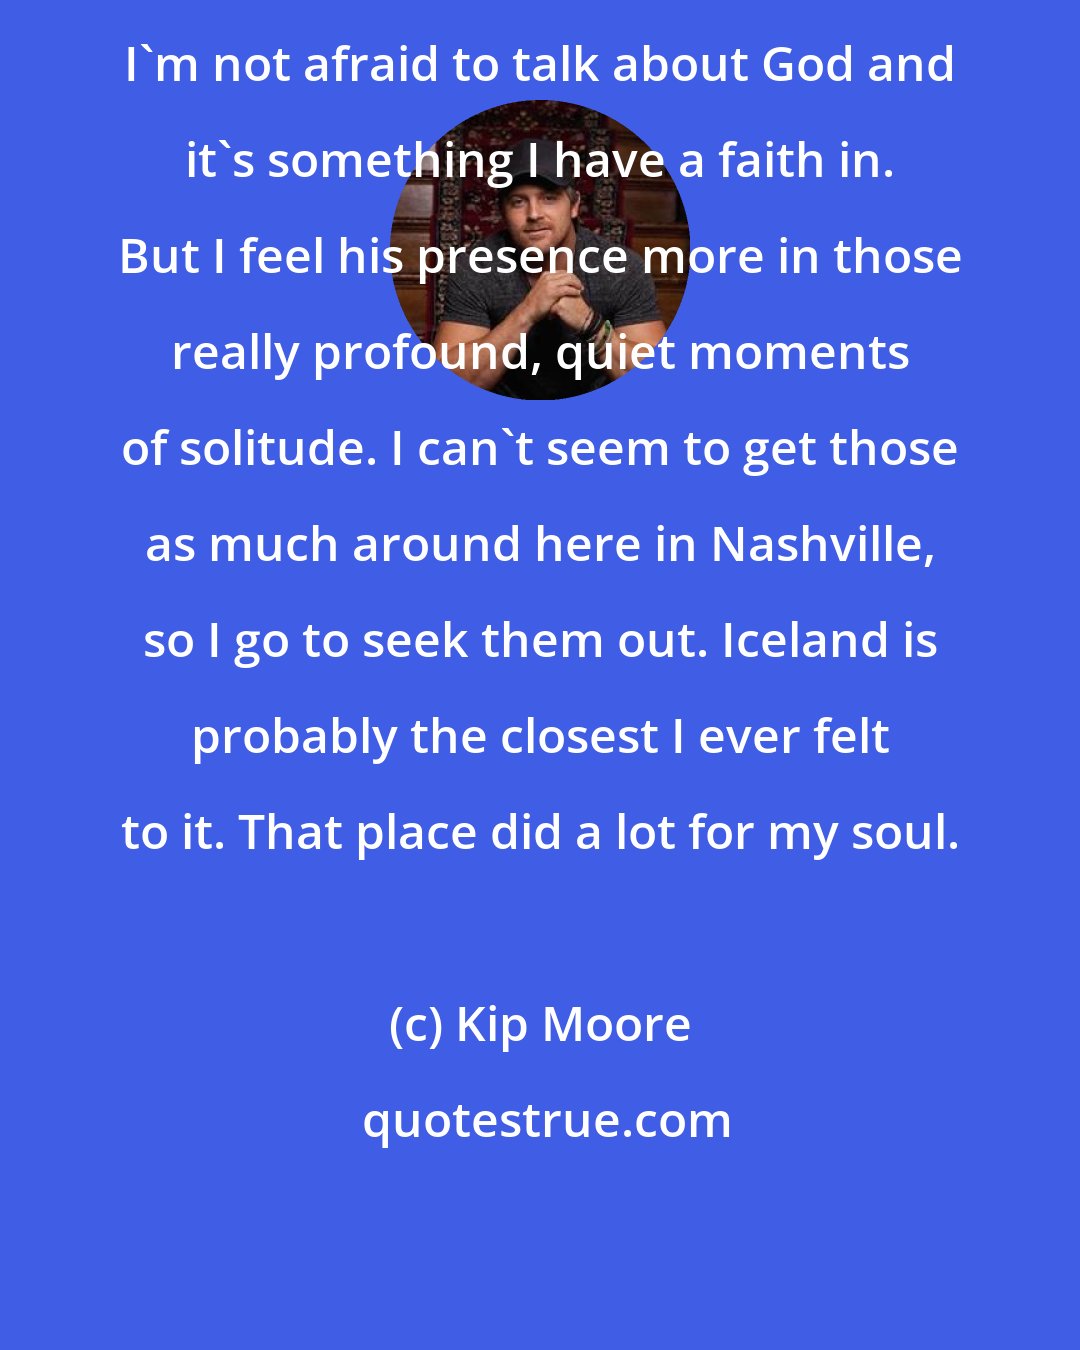 Kip Moore: I'm not afraid to talk about God and it's something I have a faith in. But I feel his presence more in those really profound, quiet moments of solitude. I can't seem to get those as much around here in Nashville, so I go to seek them out. Iceland is probably the closest I ever felt to it. That place did a lot for my soul.